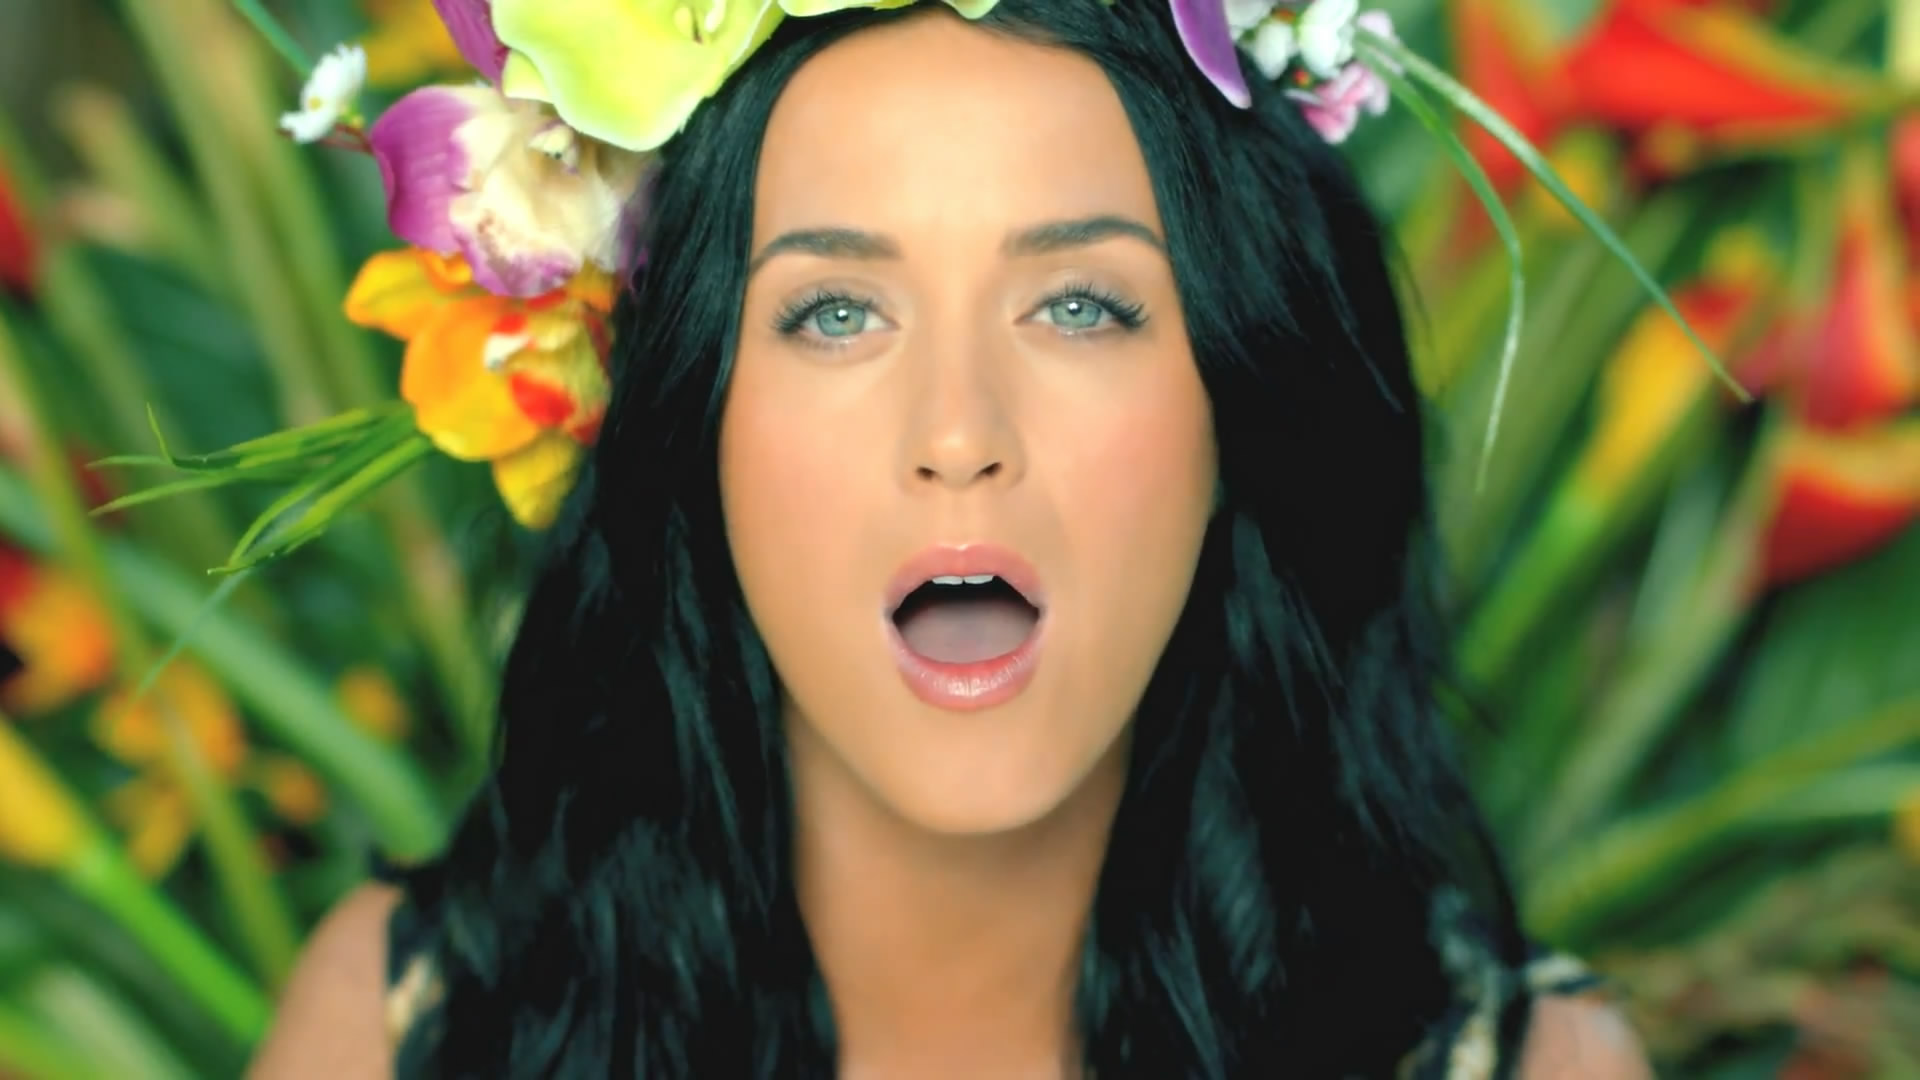 10. Katy Perry's Blue Hair: A Look Back at Her Colorful Hair ... - wide 5